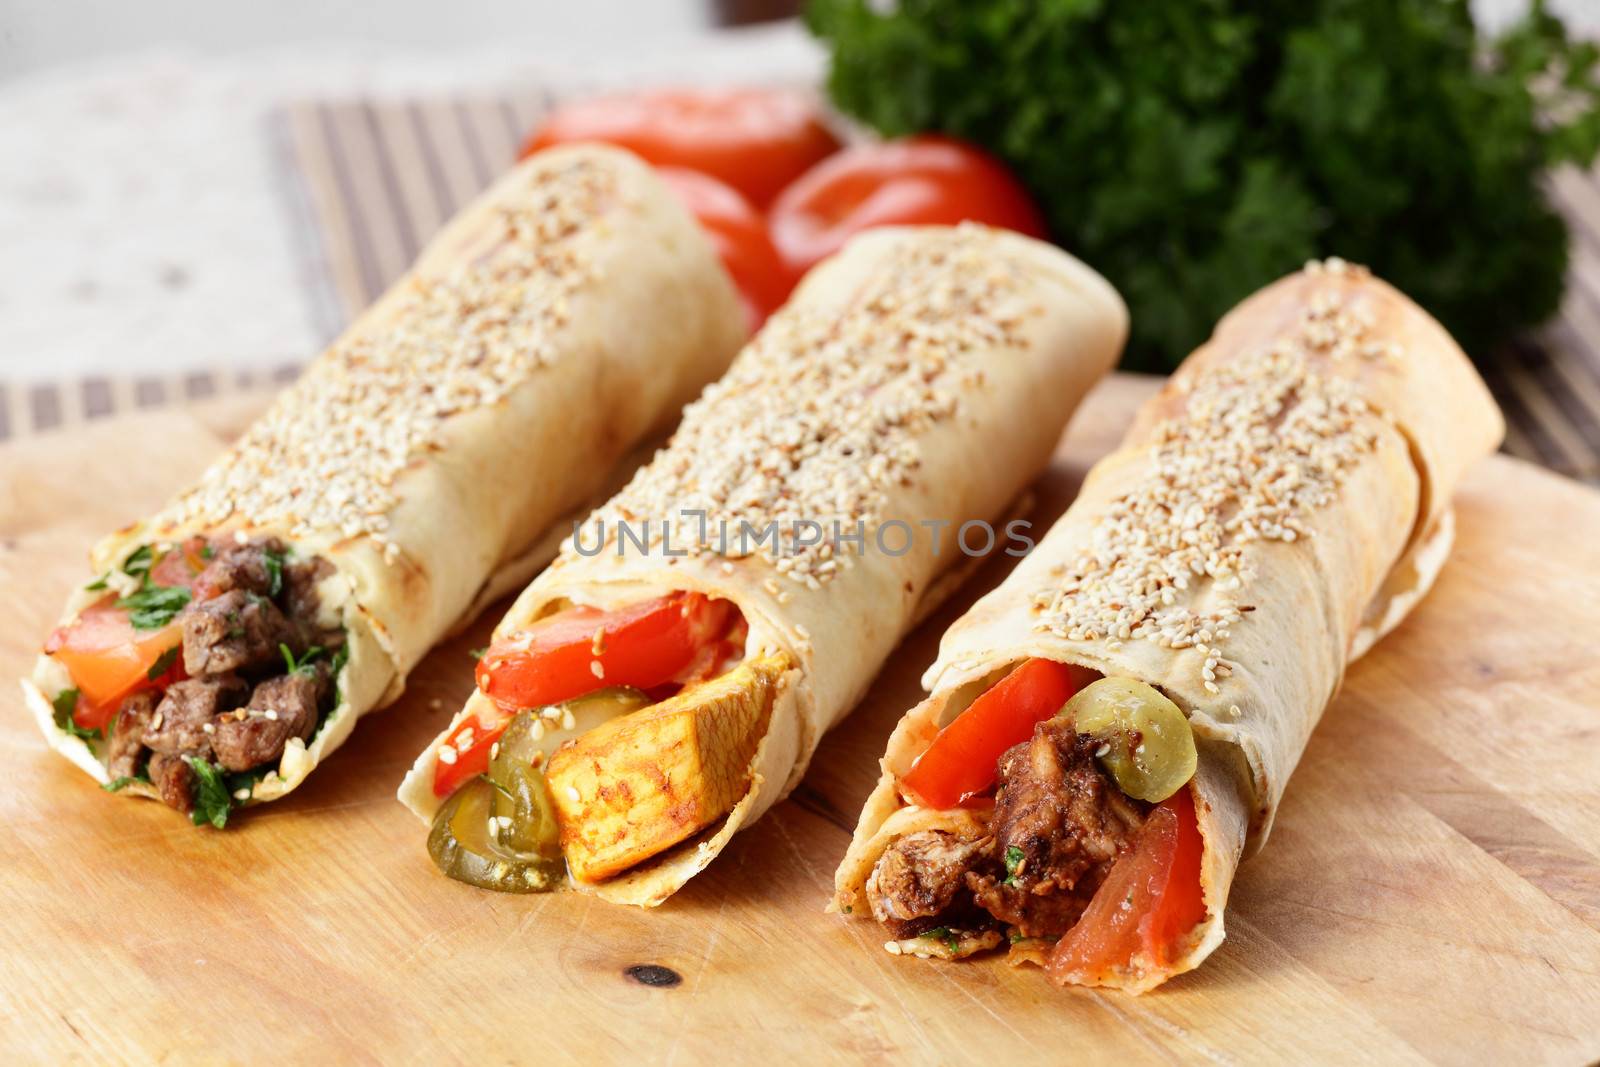 hot shawarma with vegetables by fiphoto